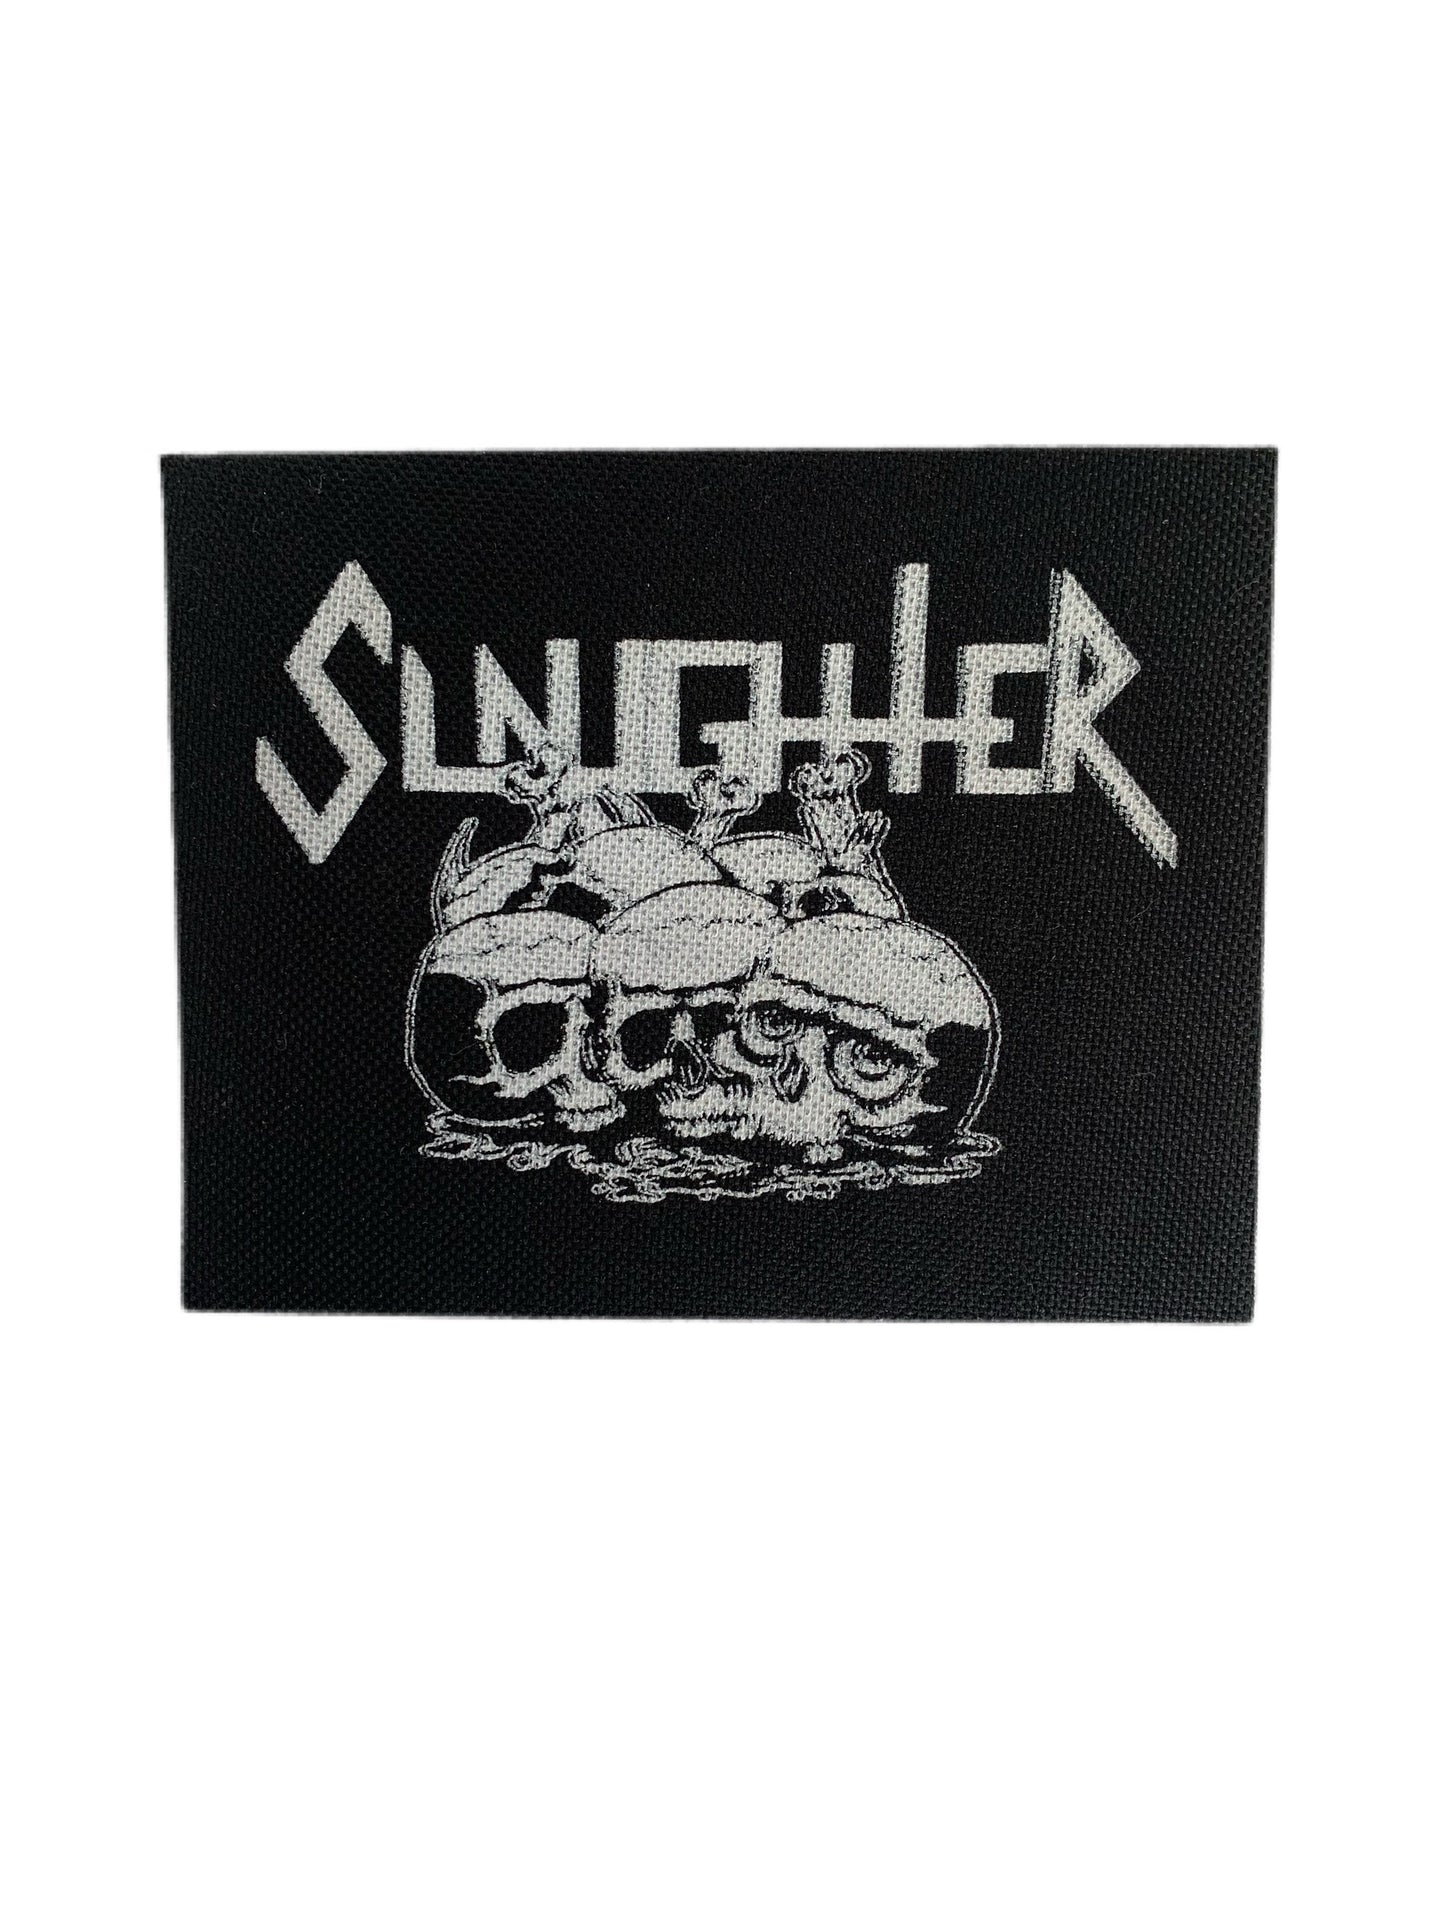 Slaughter band patch for jacket or backpack